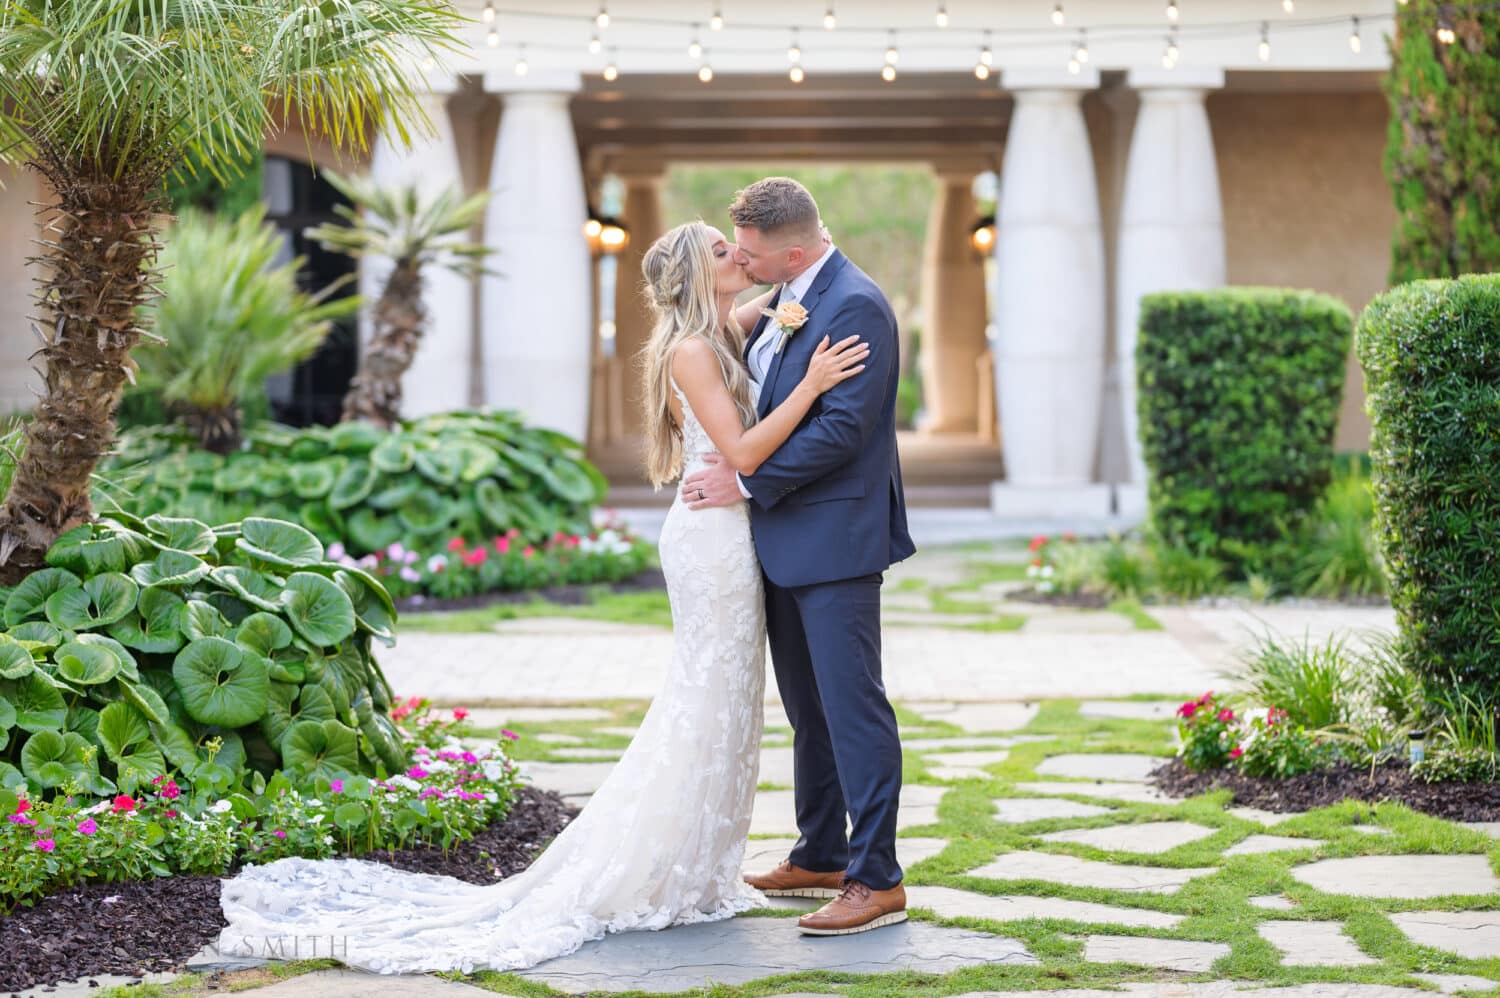 Romantic portraits in the beautiful courtyard foliage of the bride and groom - 21 Main Events